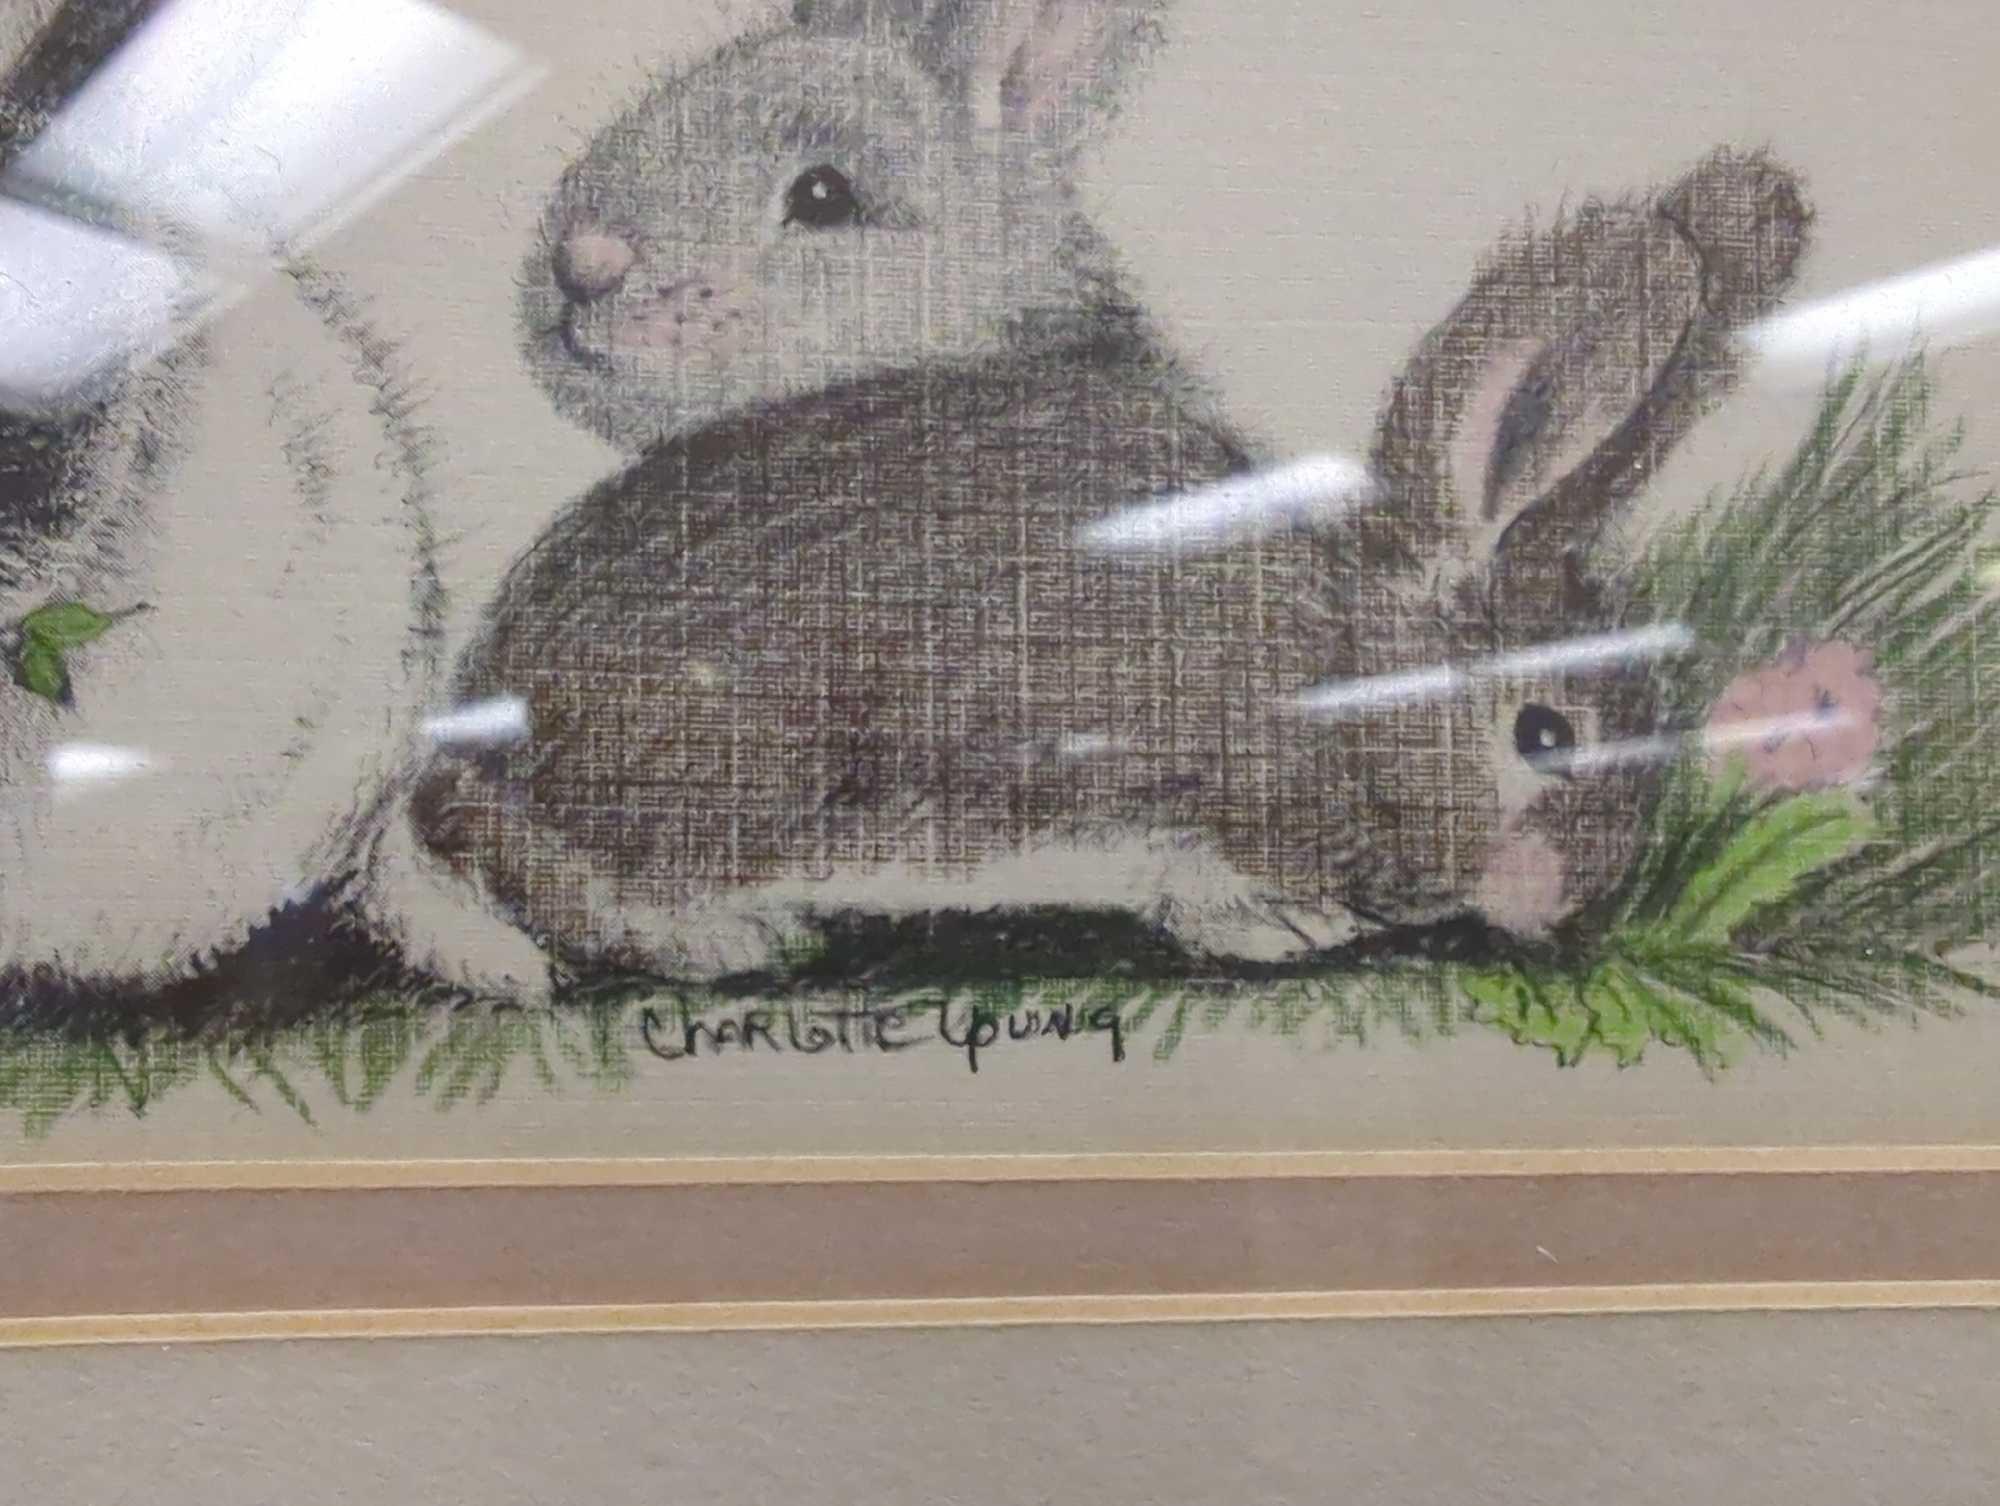 Framed Print of "Bunny Rabbits" by Charlotte Young, Approximate Dimensions - 20" x 10", Signed and